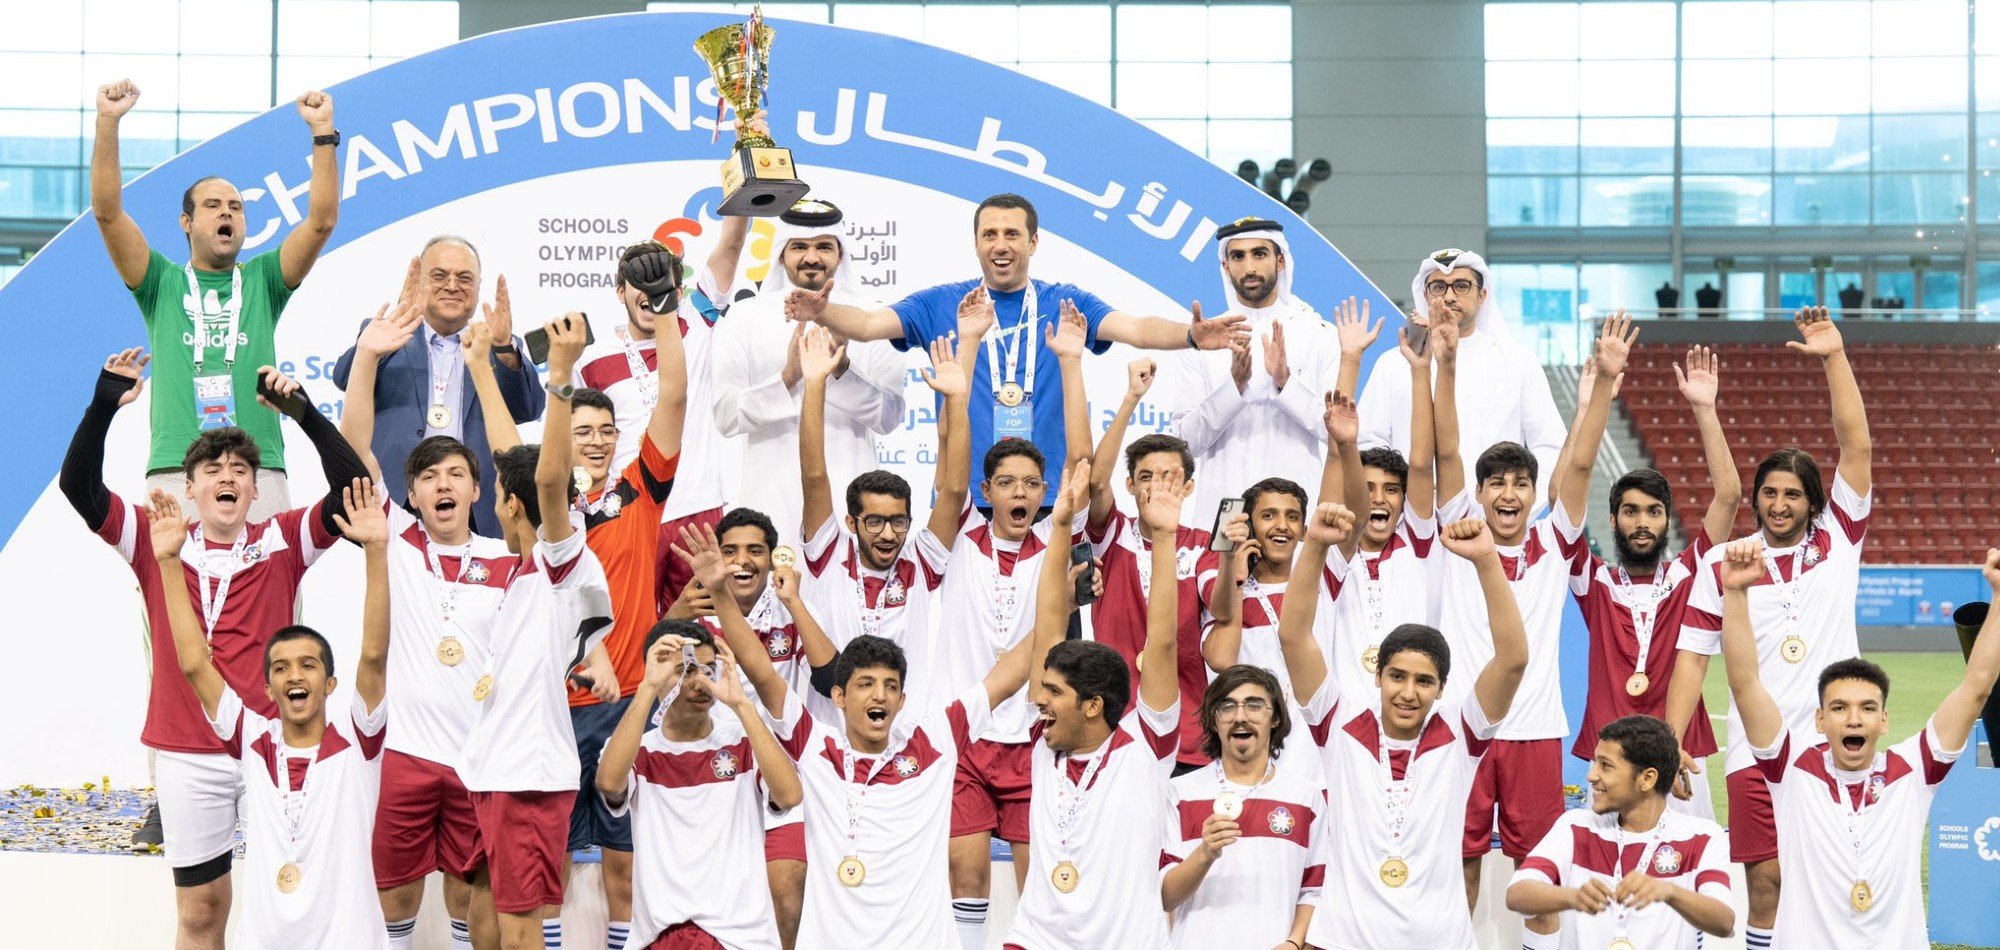 Sheikh Joaan crowns winners as Schools Olympic Program concludes